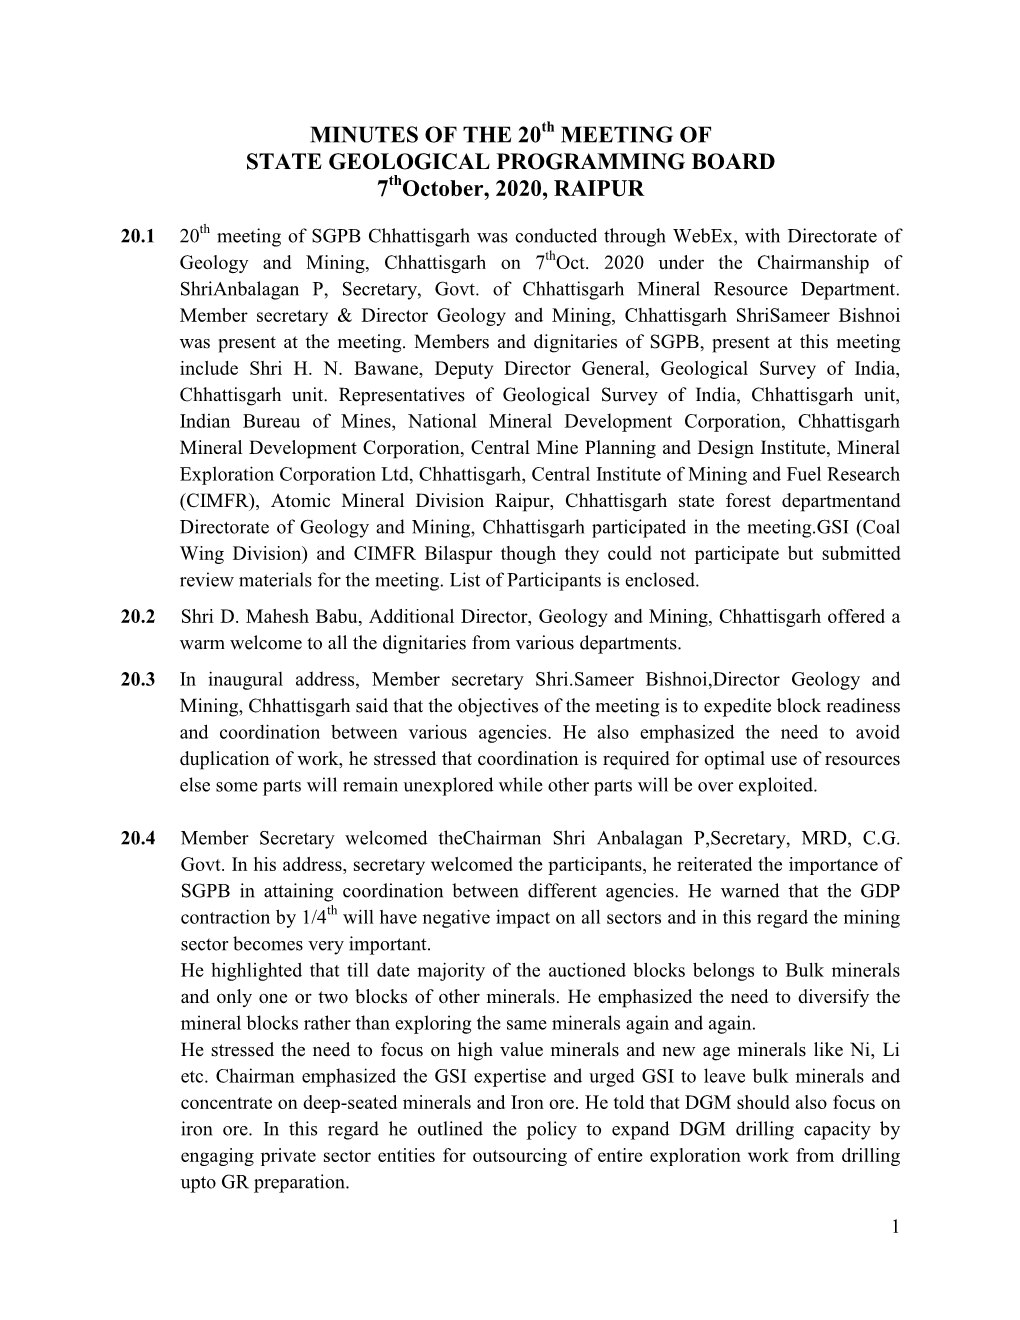 MINUTES of the 20 MEETING of STATE GEOLOGICAL PROGRAMMING BOARD 7 October, 2020, RAIPUR